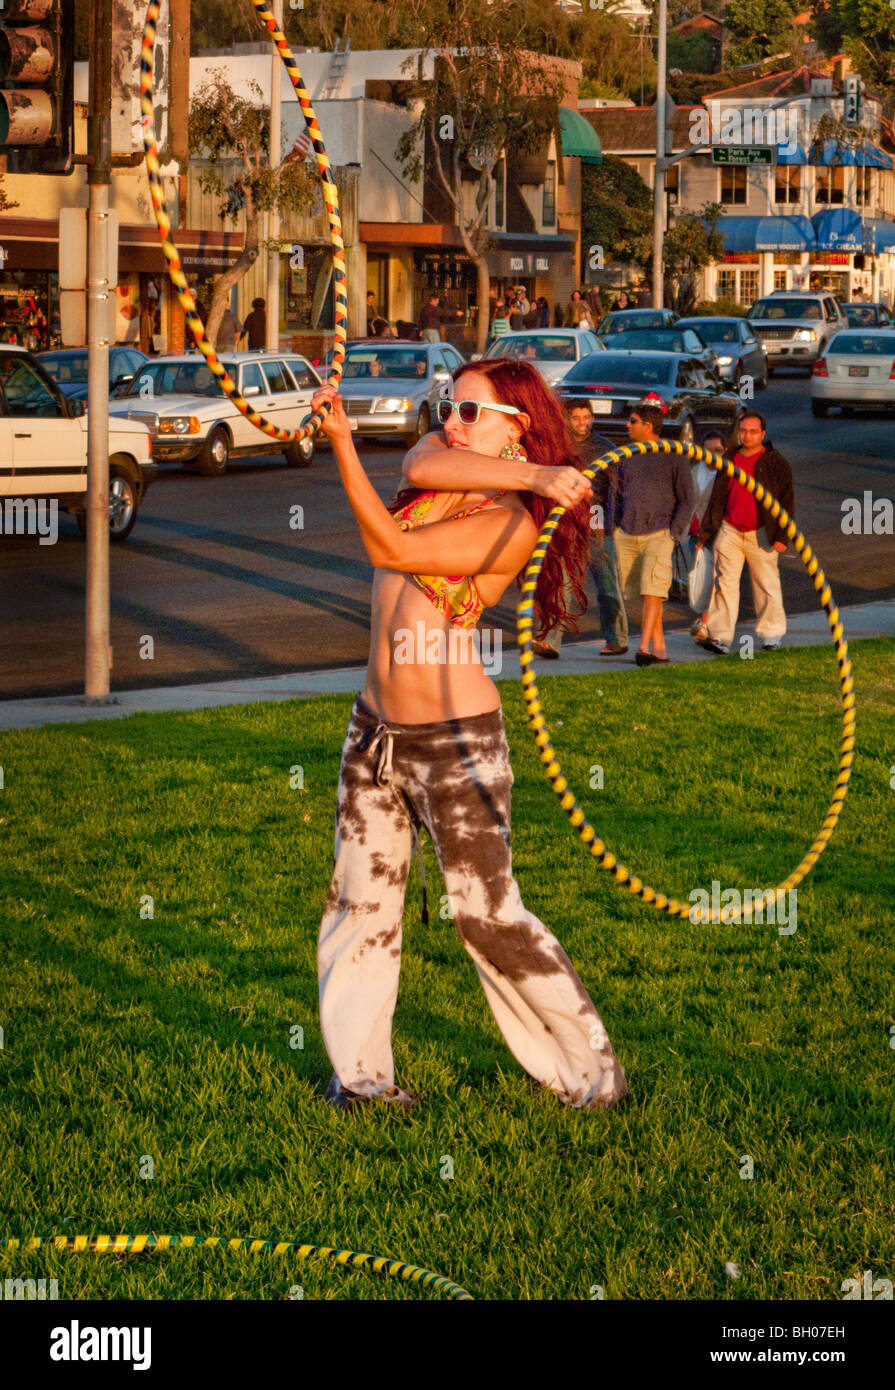 A hula hoop enthusiast holds a 'Hoopnosis' session in late afternoon sun next to Pacific Coast Highway in Laguna Beach, CA Stock Photo